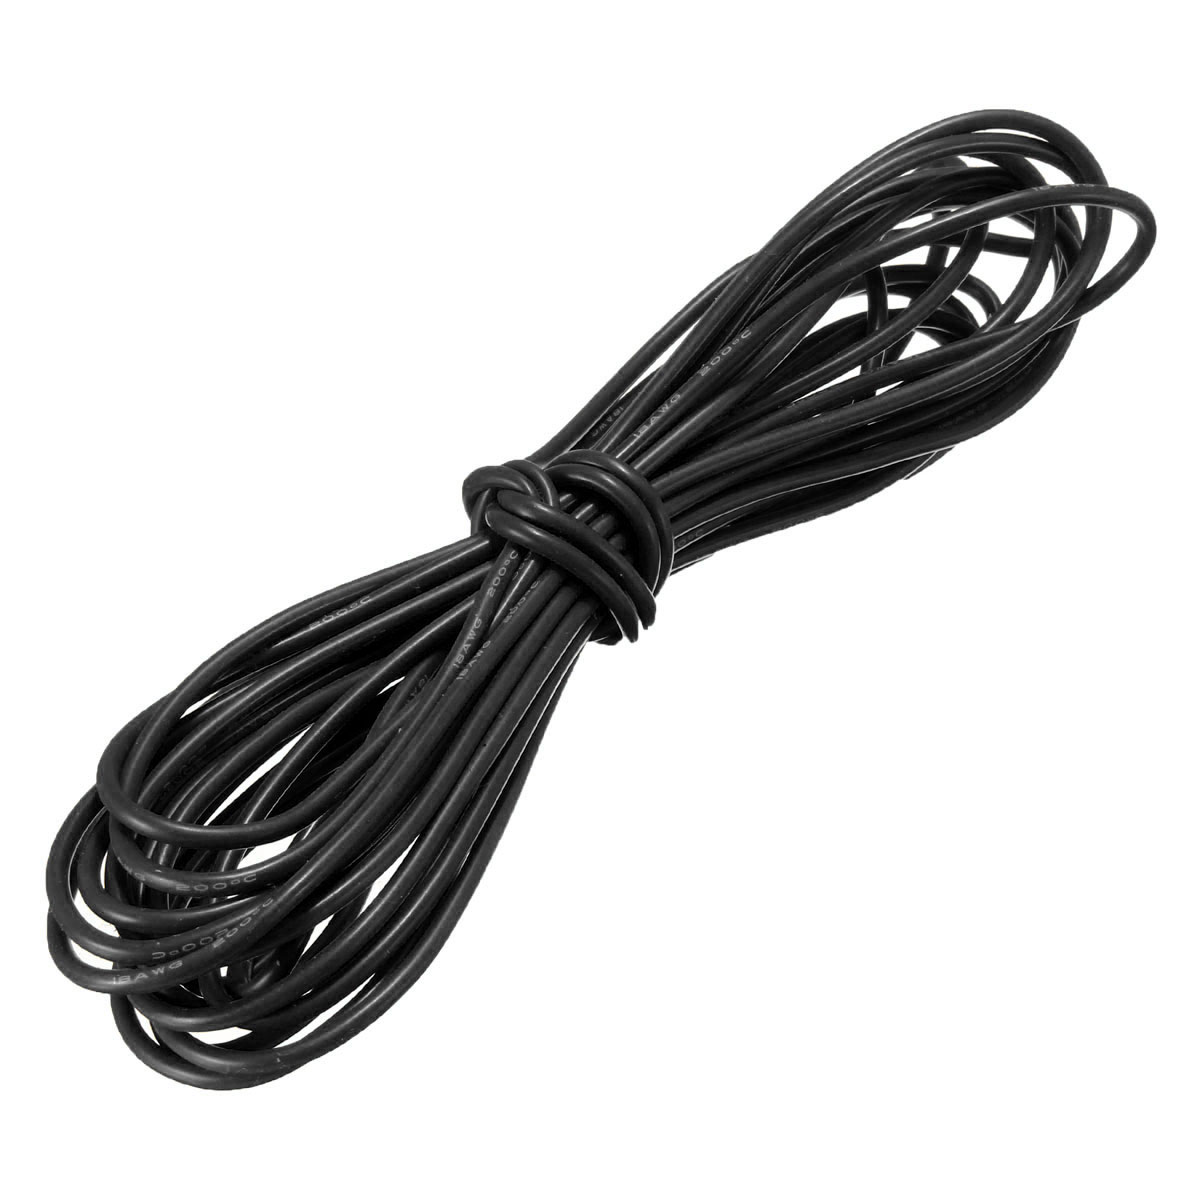 DANIU-5-Meter-Black-Silicone-Wire-Cable-10121416182022AWG-Flexible-Cable-1170293-7